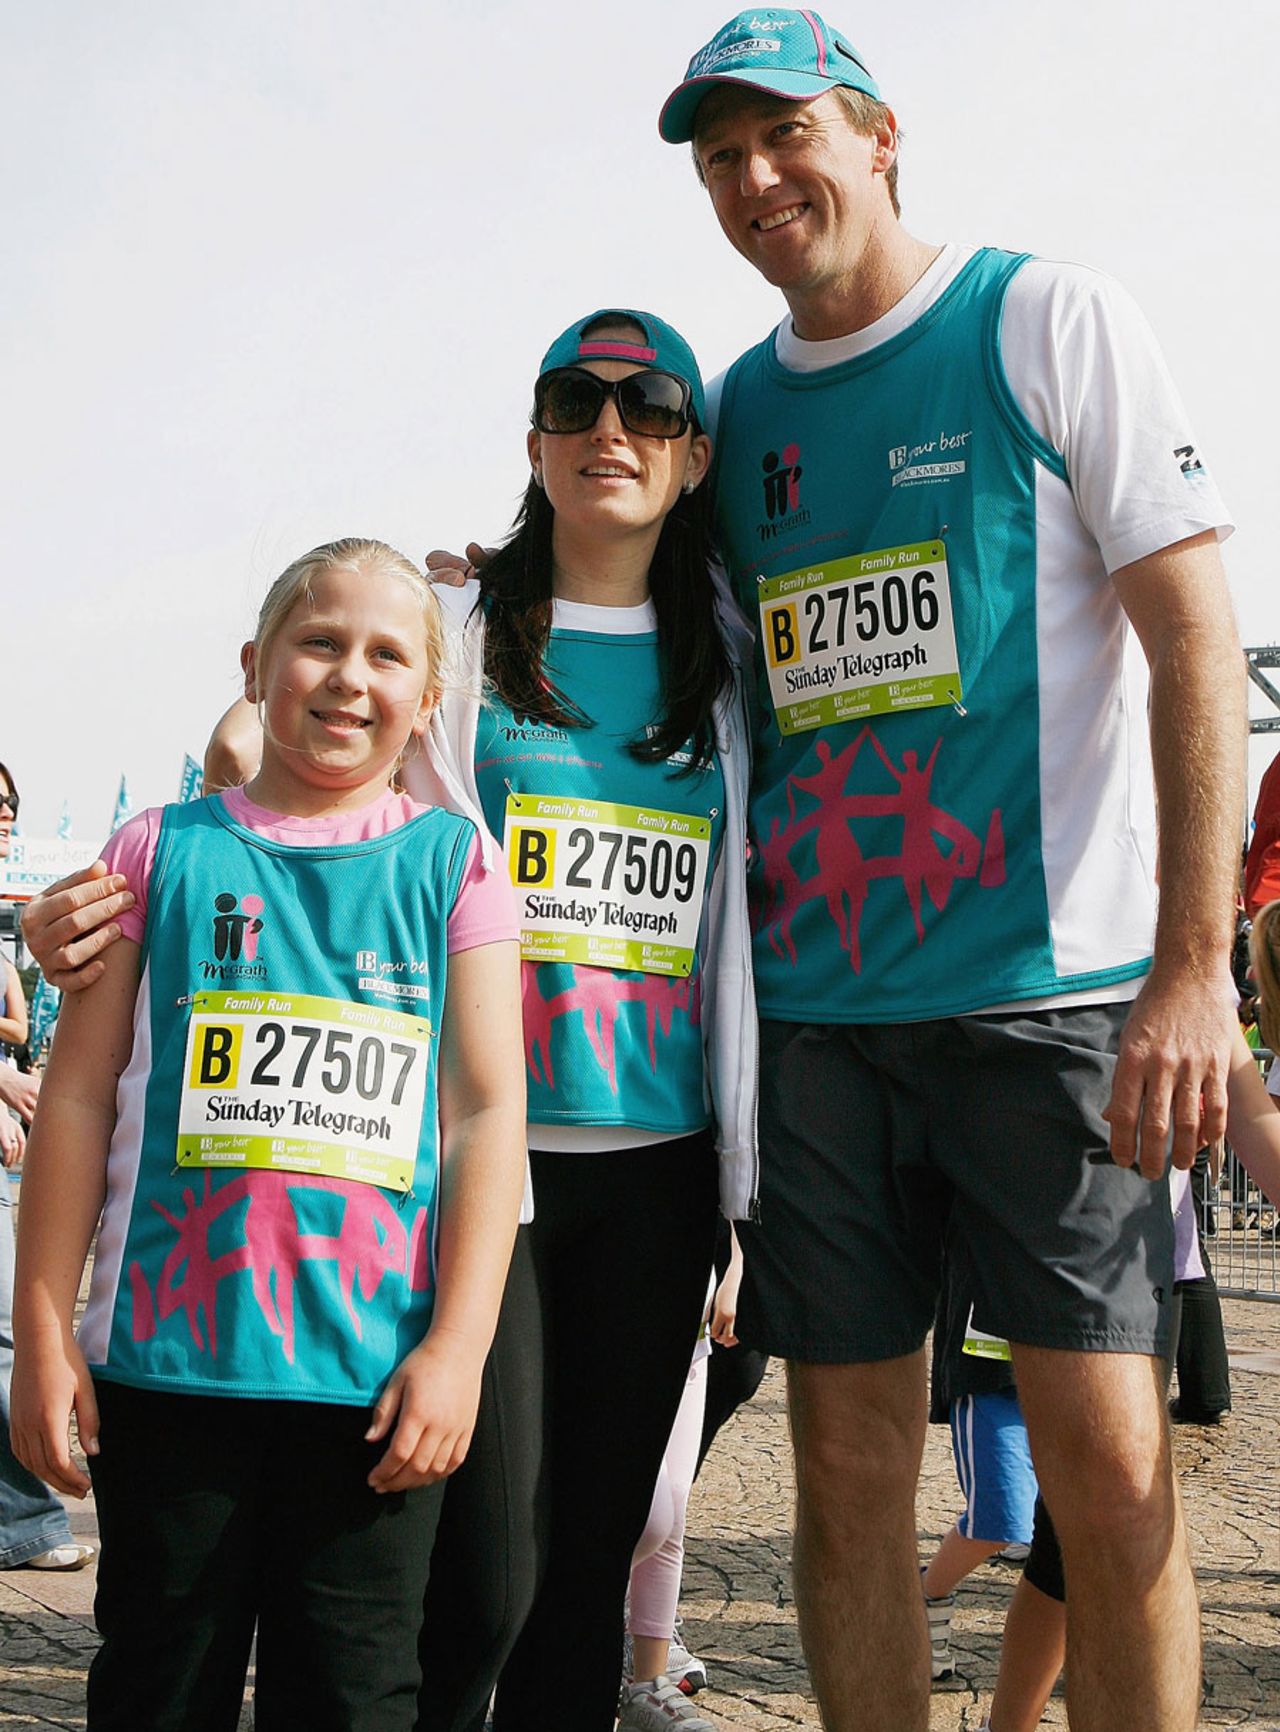 Glenn McGrath with his fiance and daughter after completing the 4km Family Fun Run, Sydney, September 19, 2010 